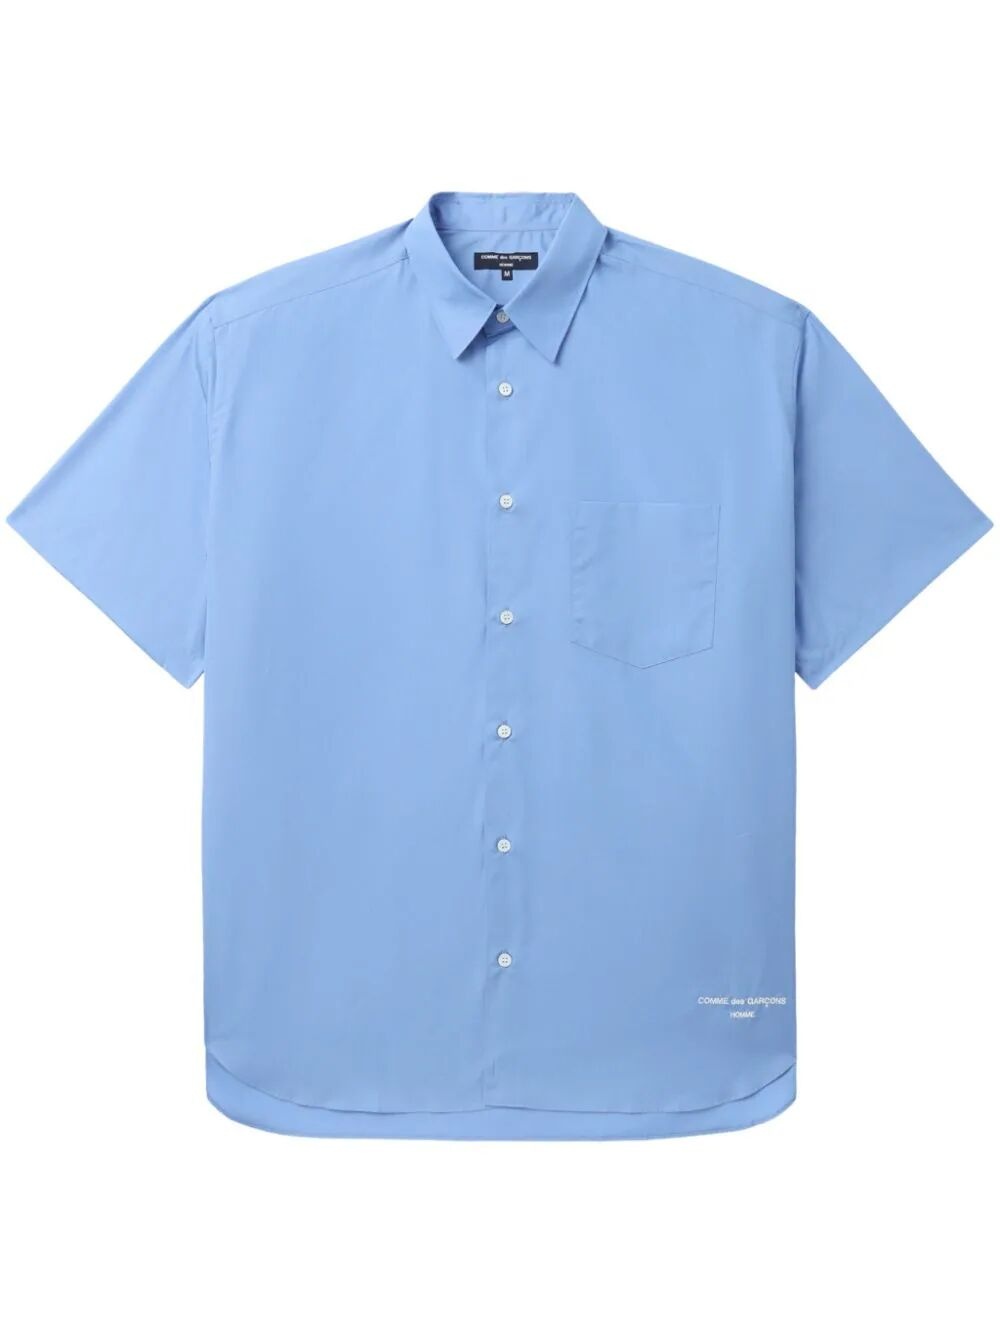 ICONIC COTTON SHIRT WITH LOGO - 4